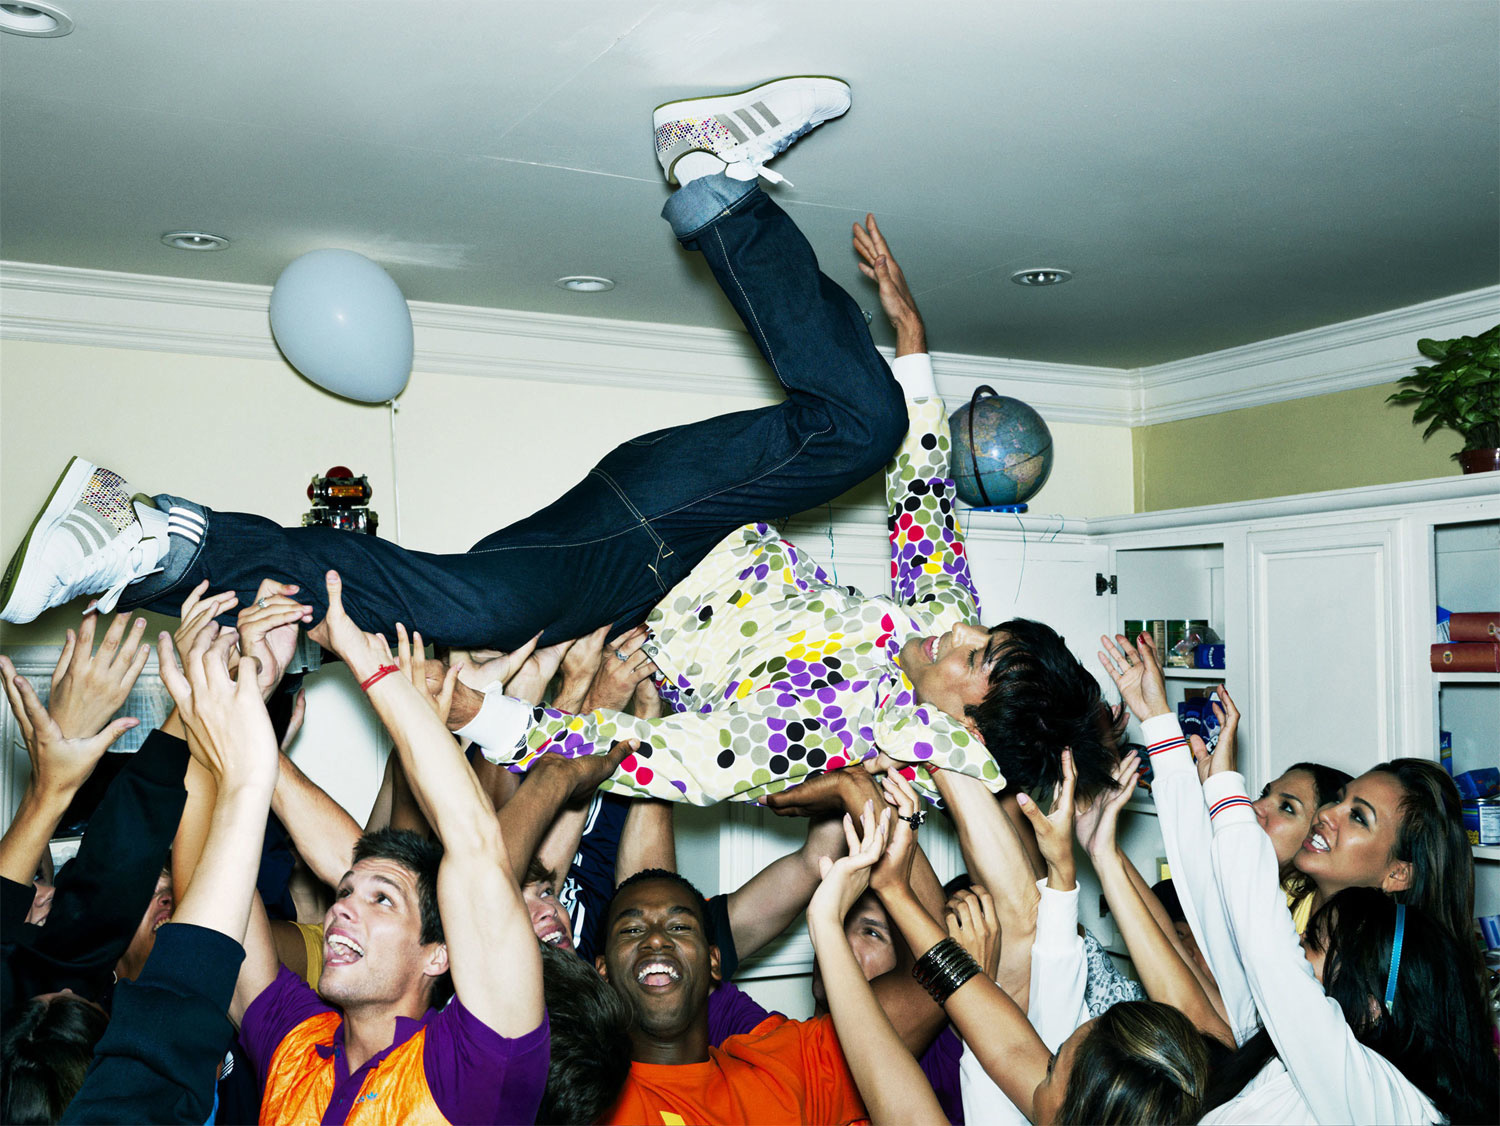 adidas house party commercial